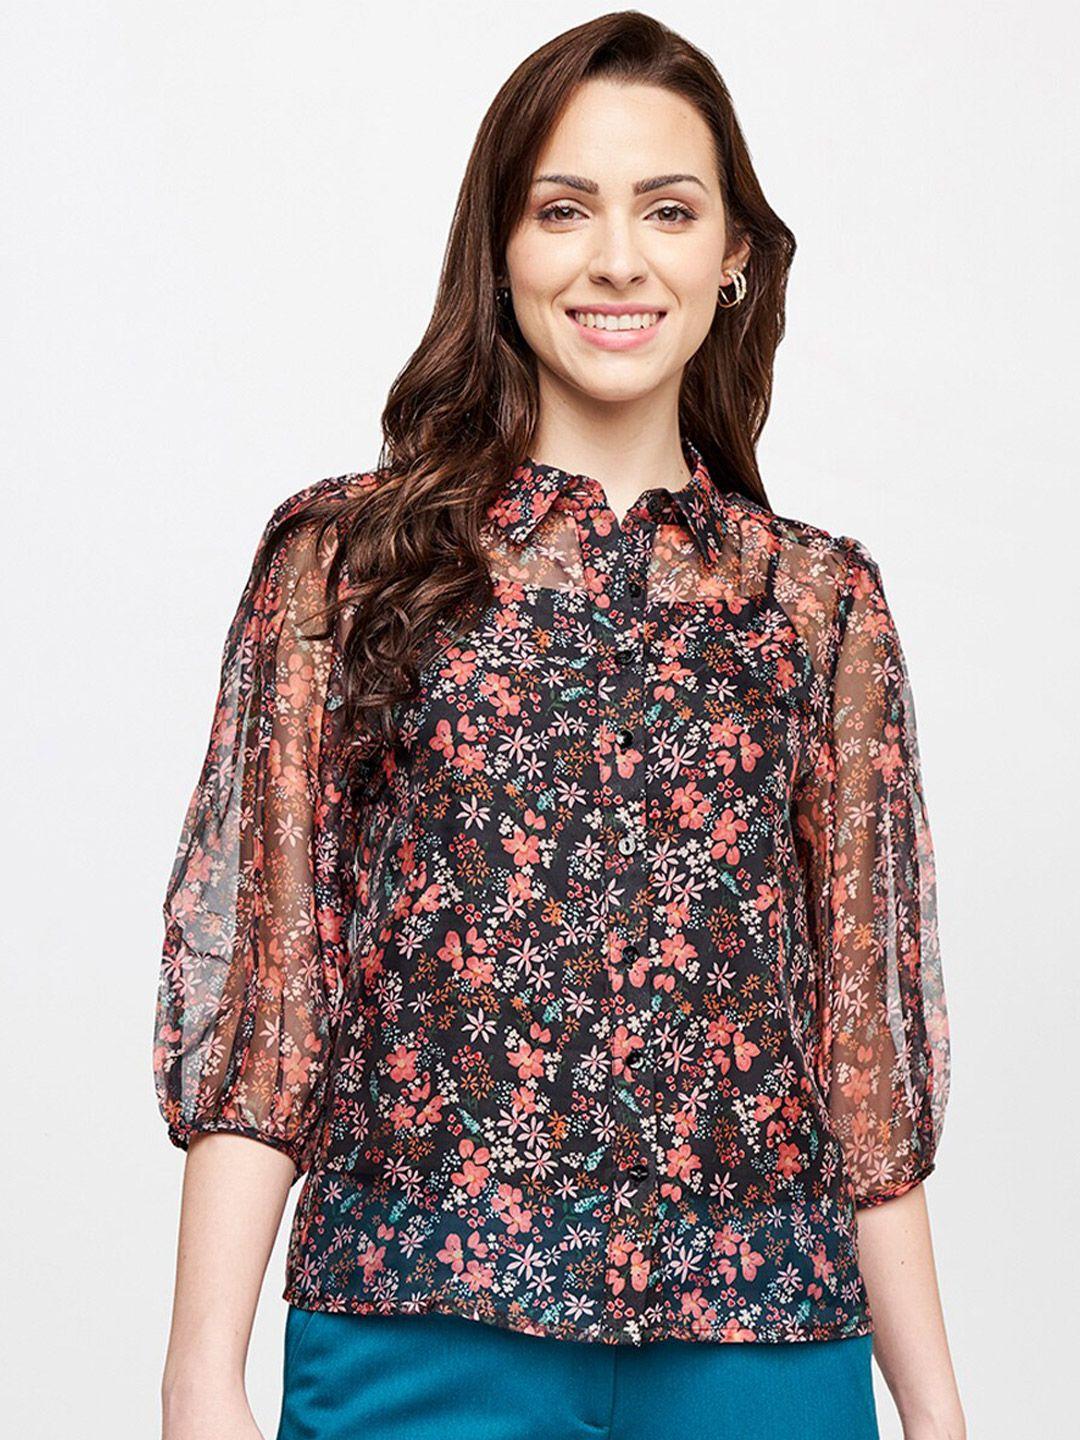 and women black & peach coloured floral print shirt style top